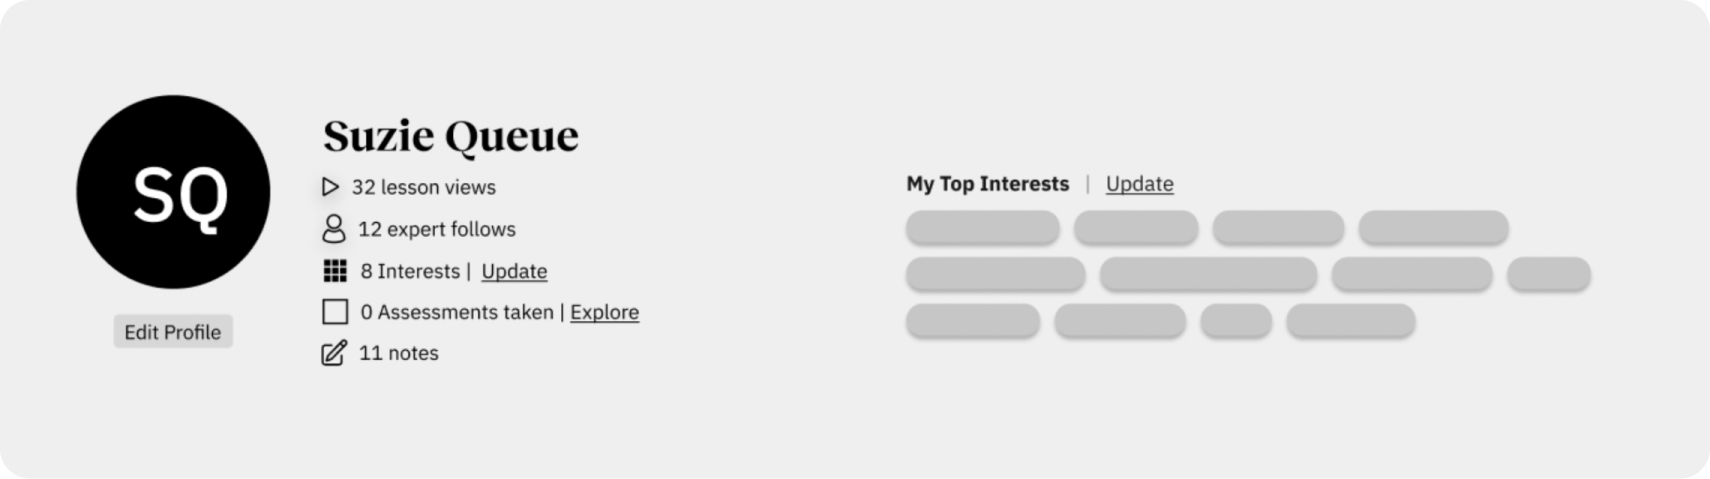 Profile page with the name "Suzie Queue," showing badge and profile stats, including lesson views, expert follows, interests, assessments, and notes. Features section "My Top Interests.